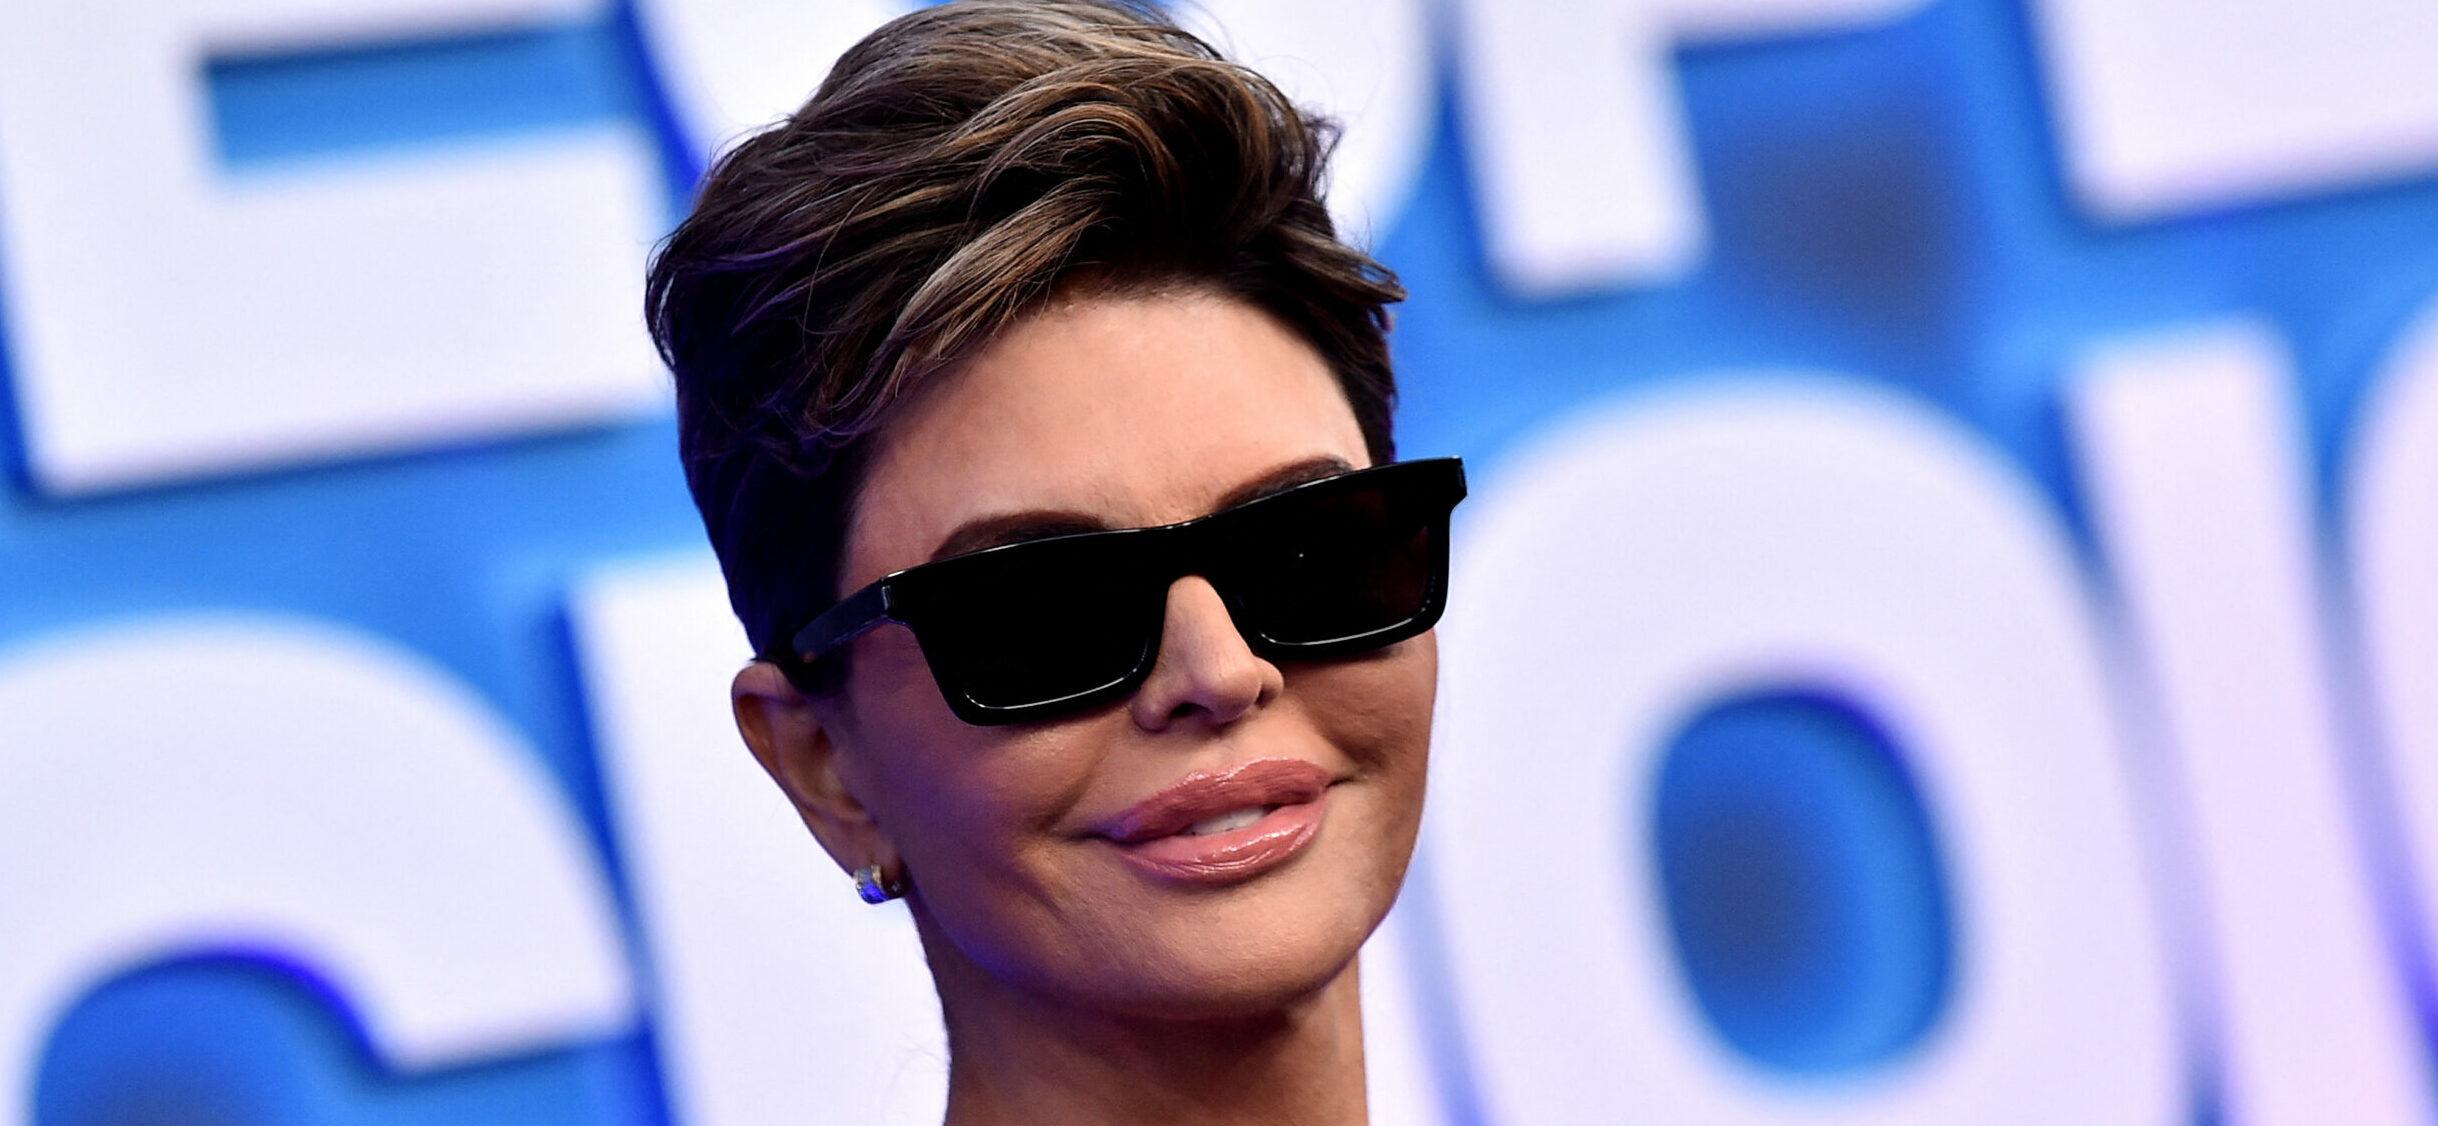 Lisa Rinna’s 8-Year Stint On ‘RHOBH’ Comes To An End As She Announces Exit